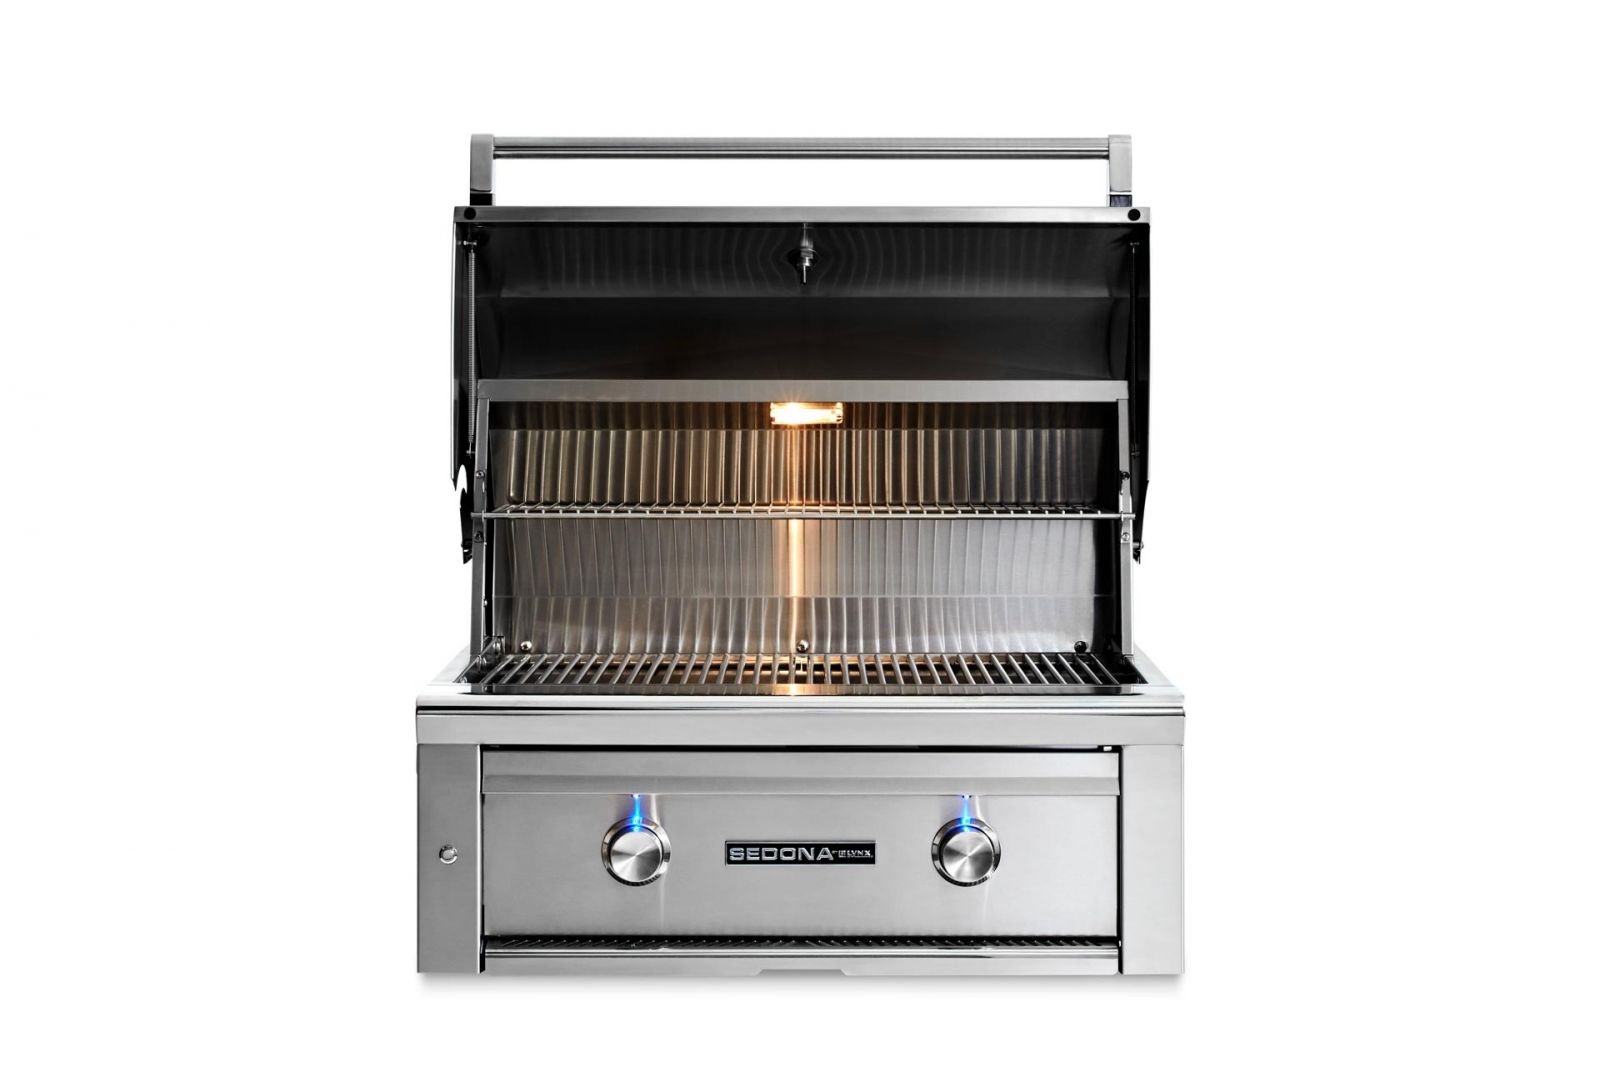 30" Built-in Grill with 1 Prosear Infrared Burner and 1 Stainless Steel Burner (L500PS)